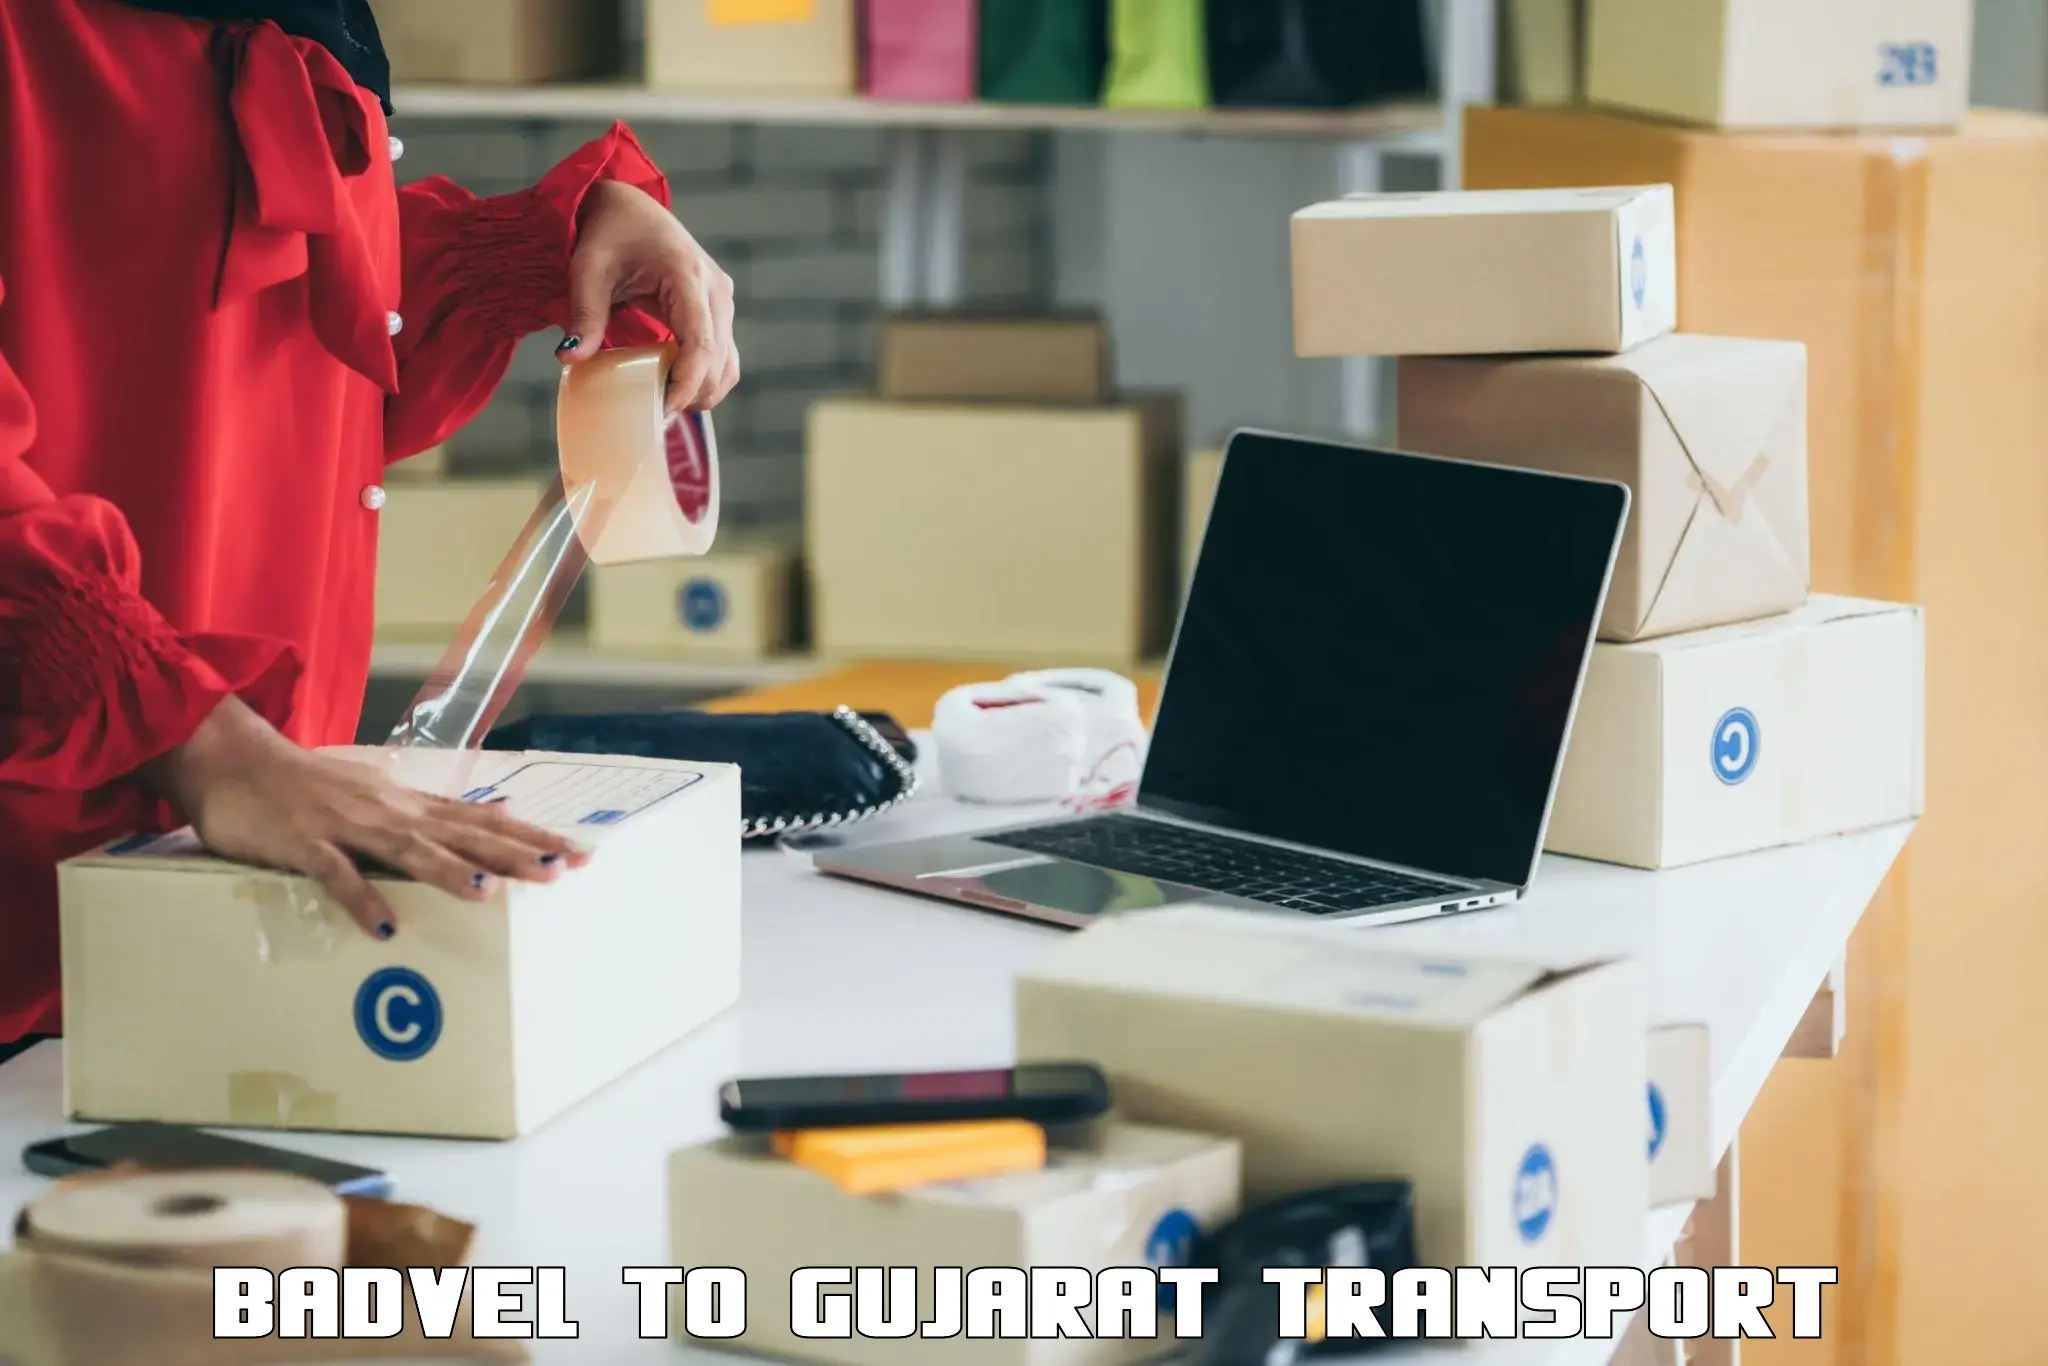 Best transport services in India Badvel to Ankleshwar